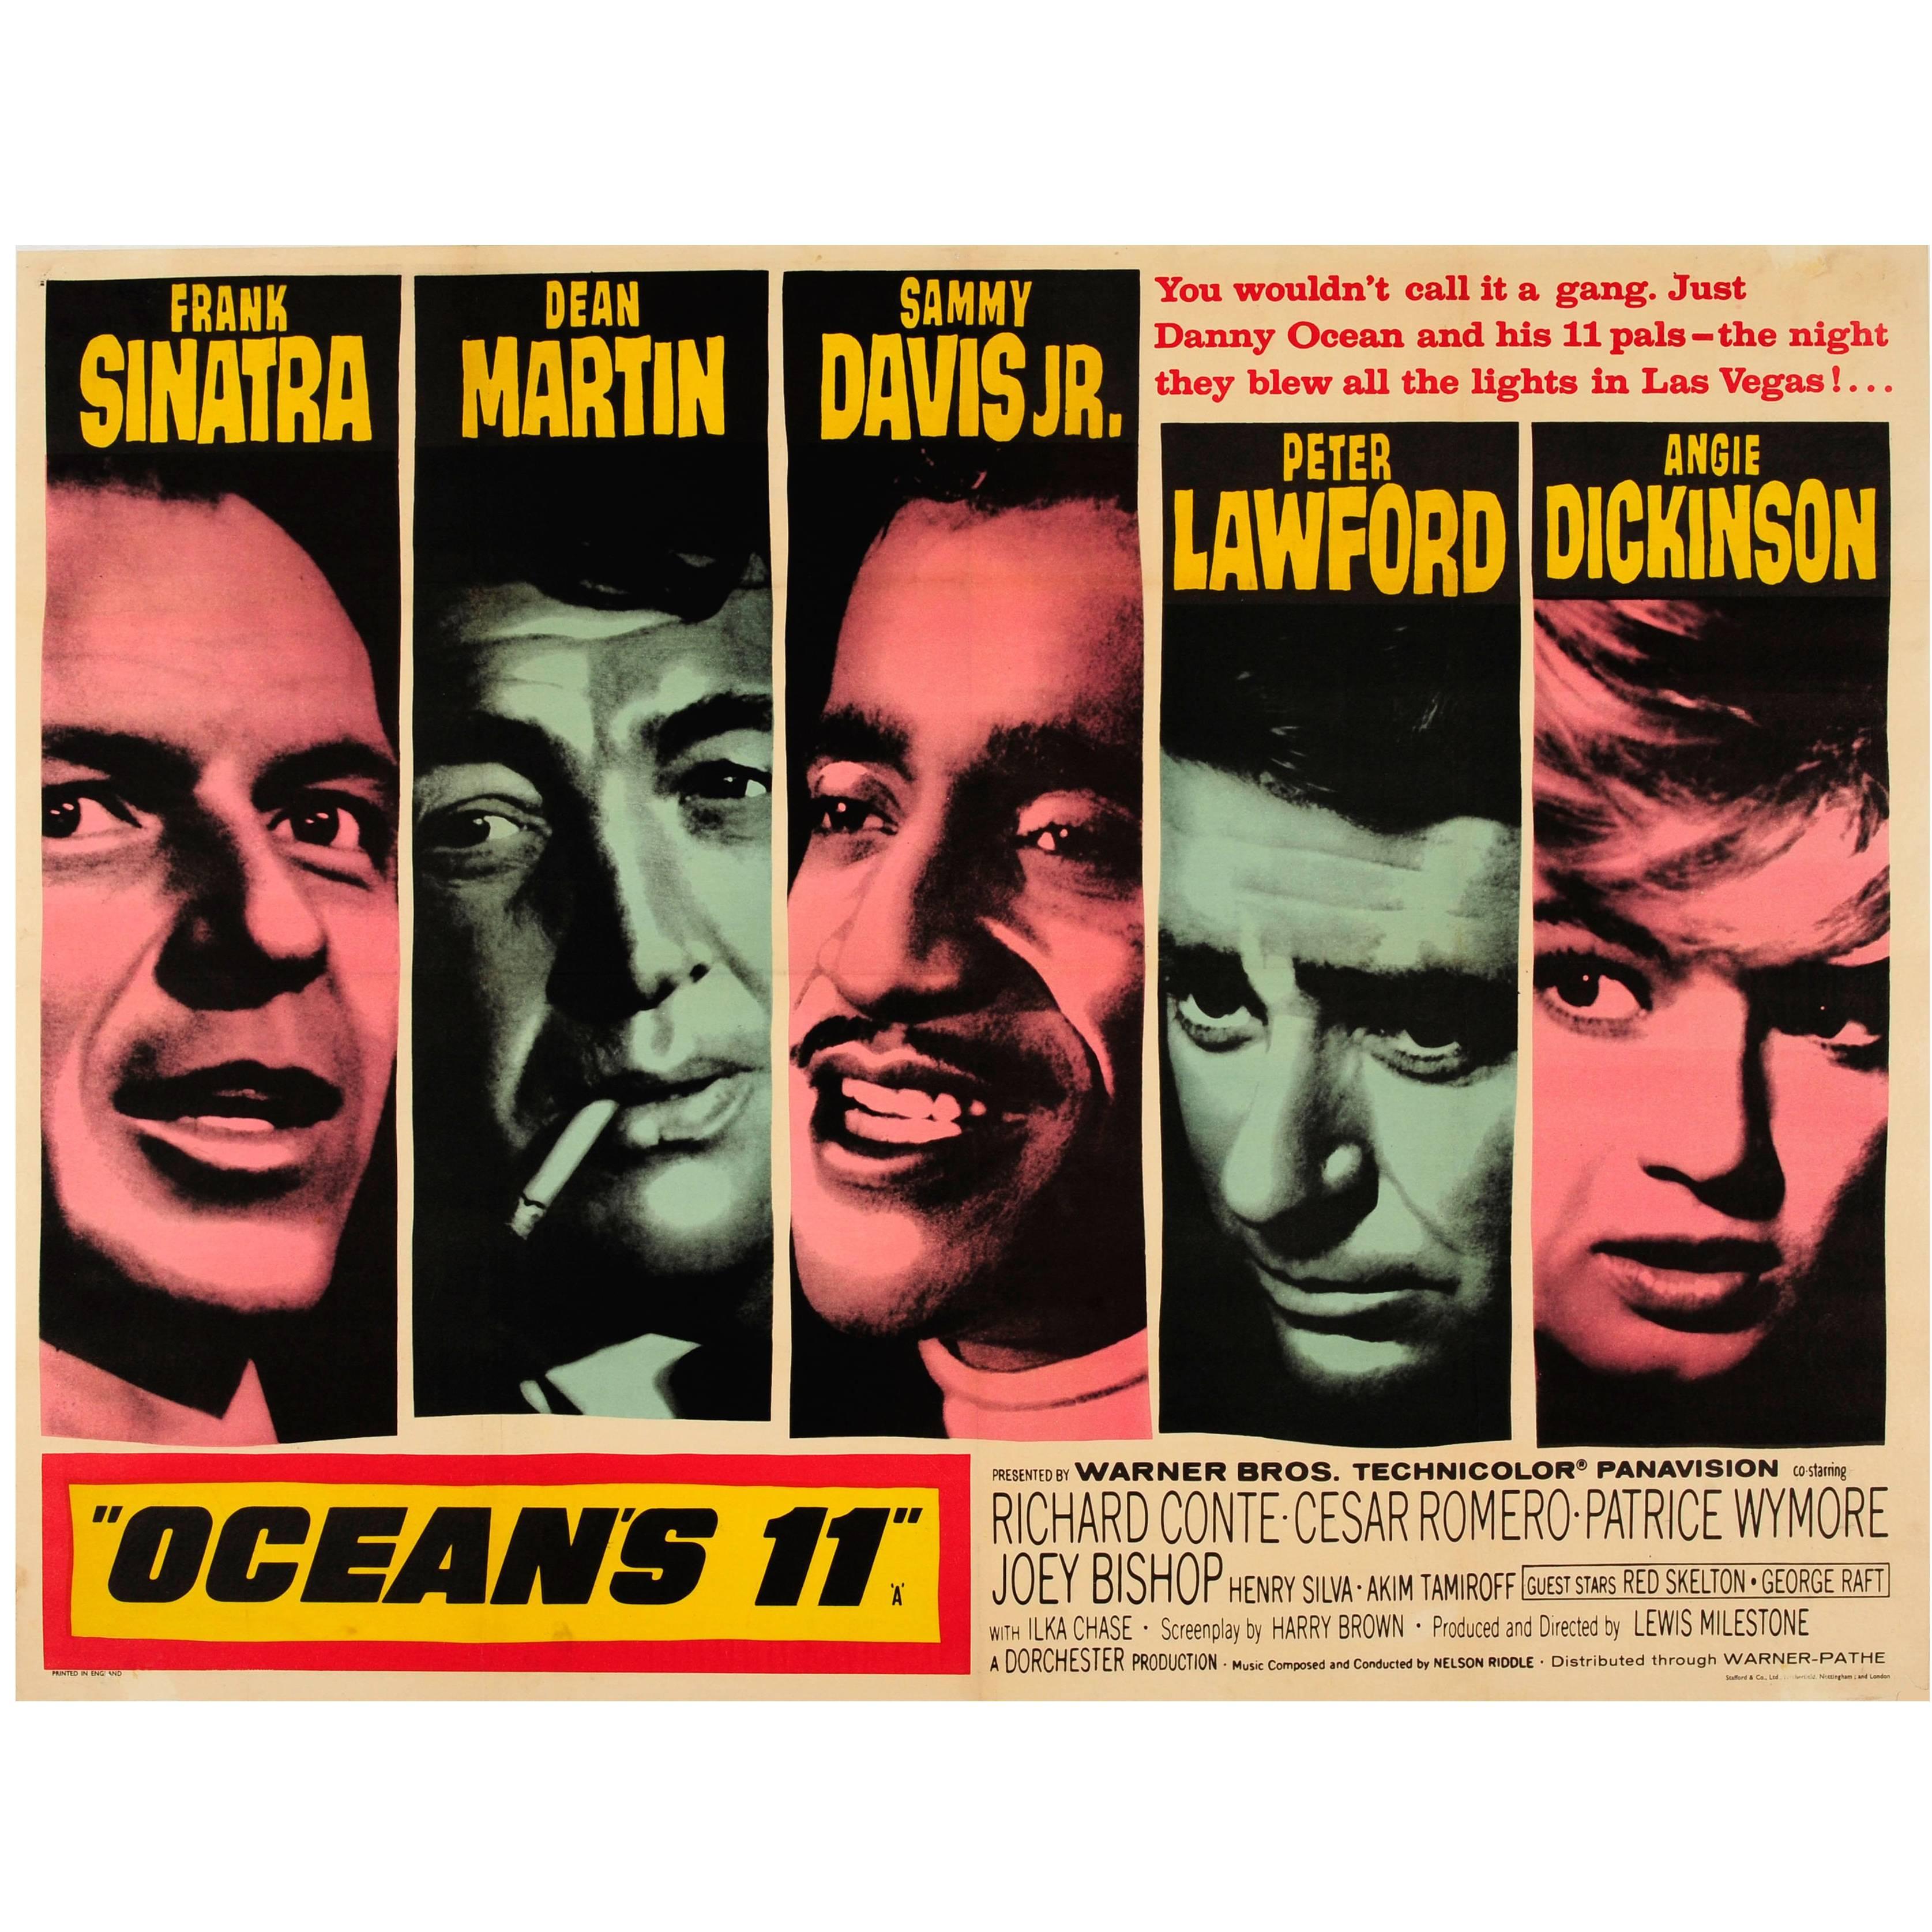 Original Vintage Classic Movie Poster for Ocean's 11, Sinatra and the Rat Pack